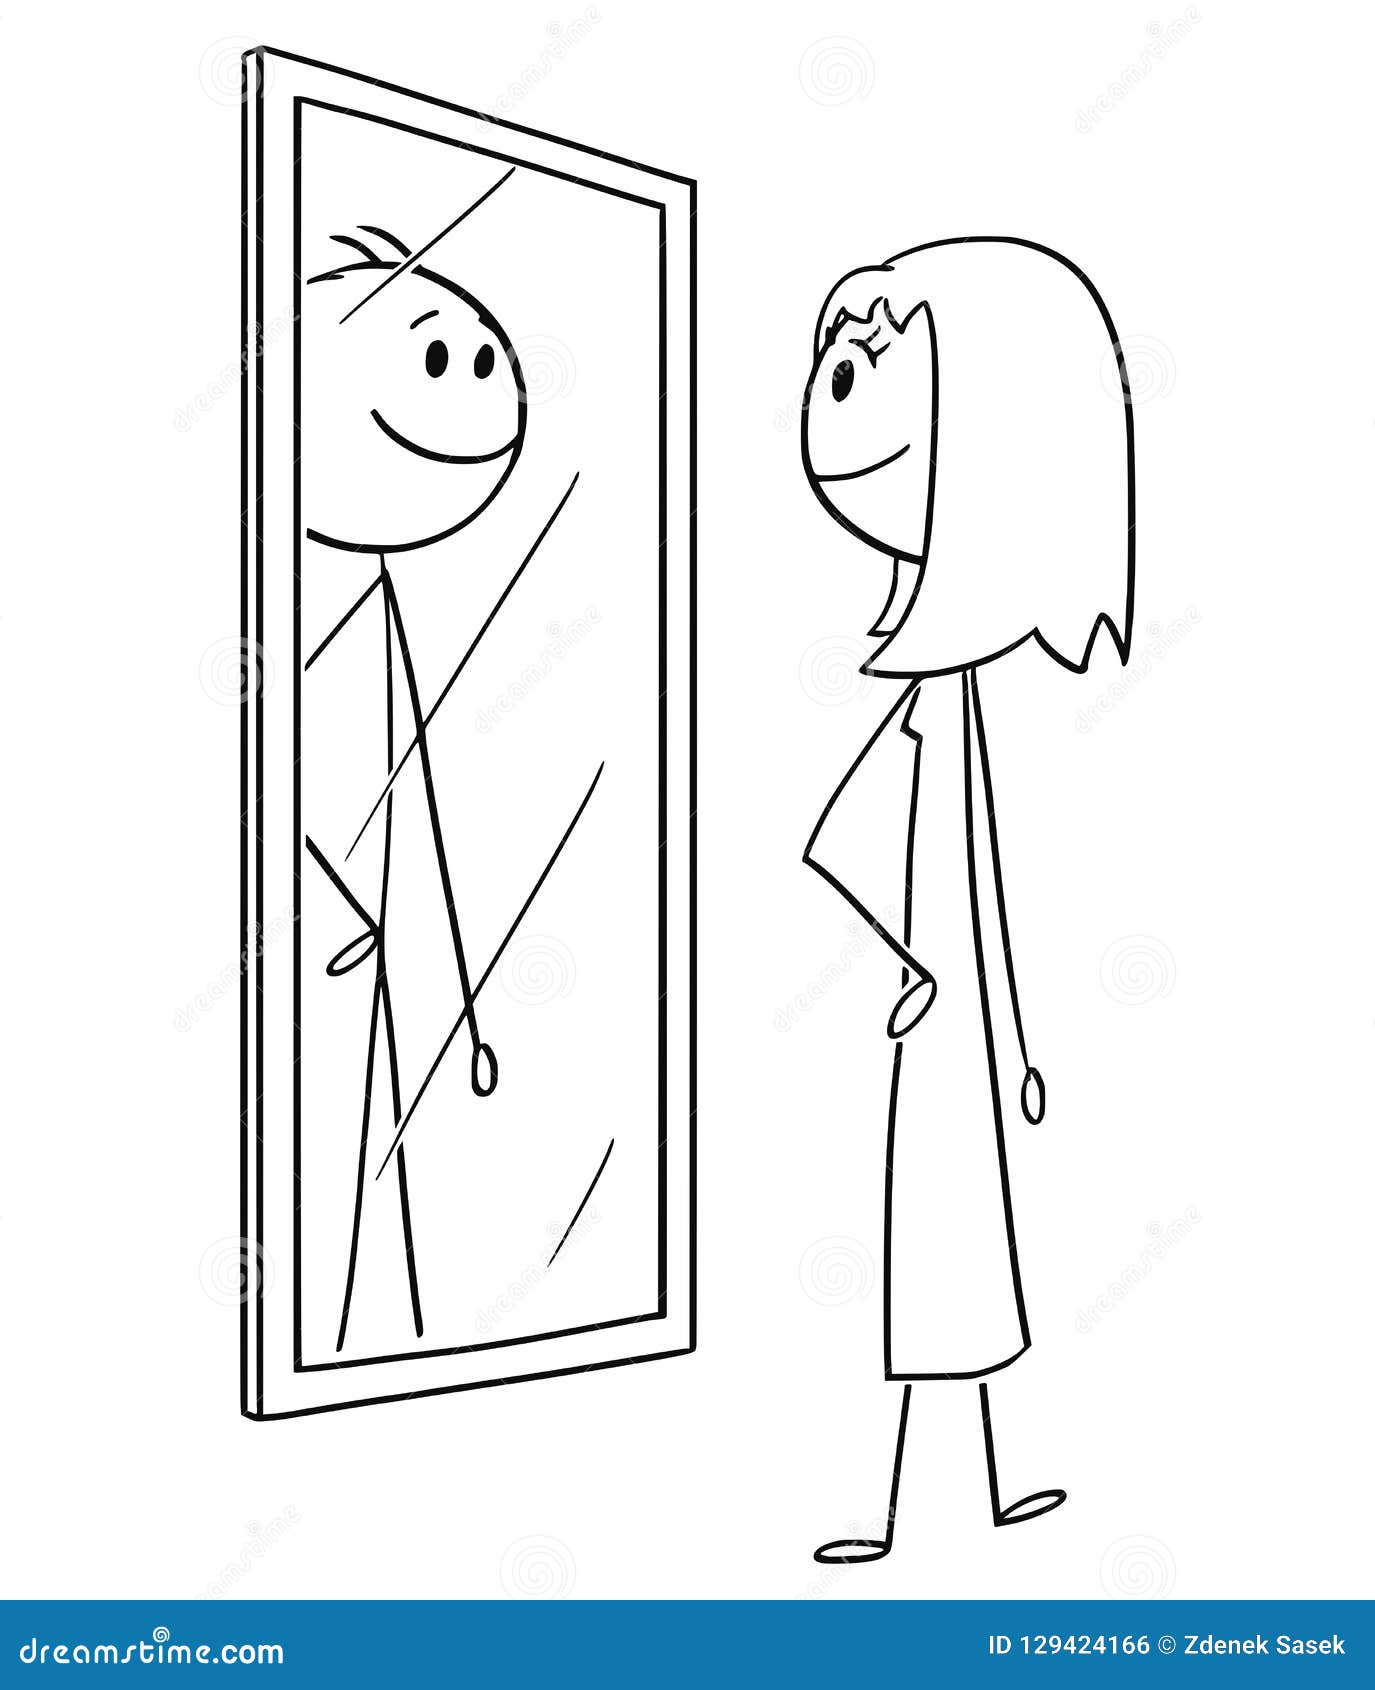 cartoon of woman looking at herself in the mirror but seeing man inside